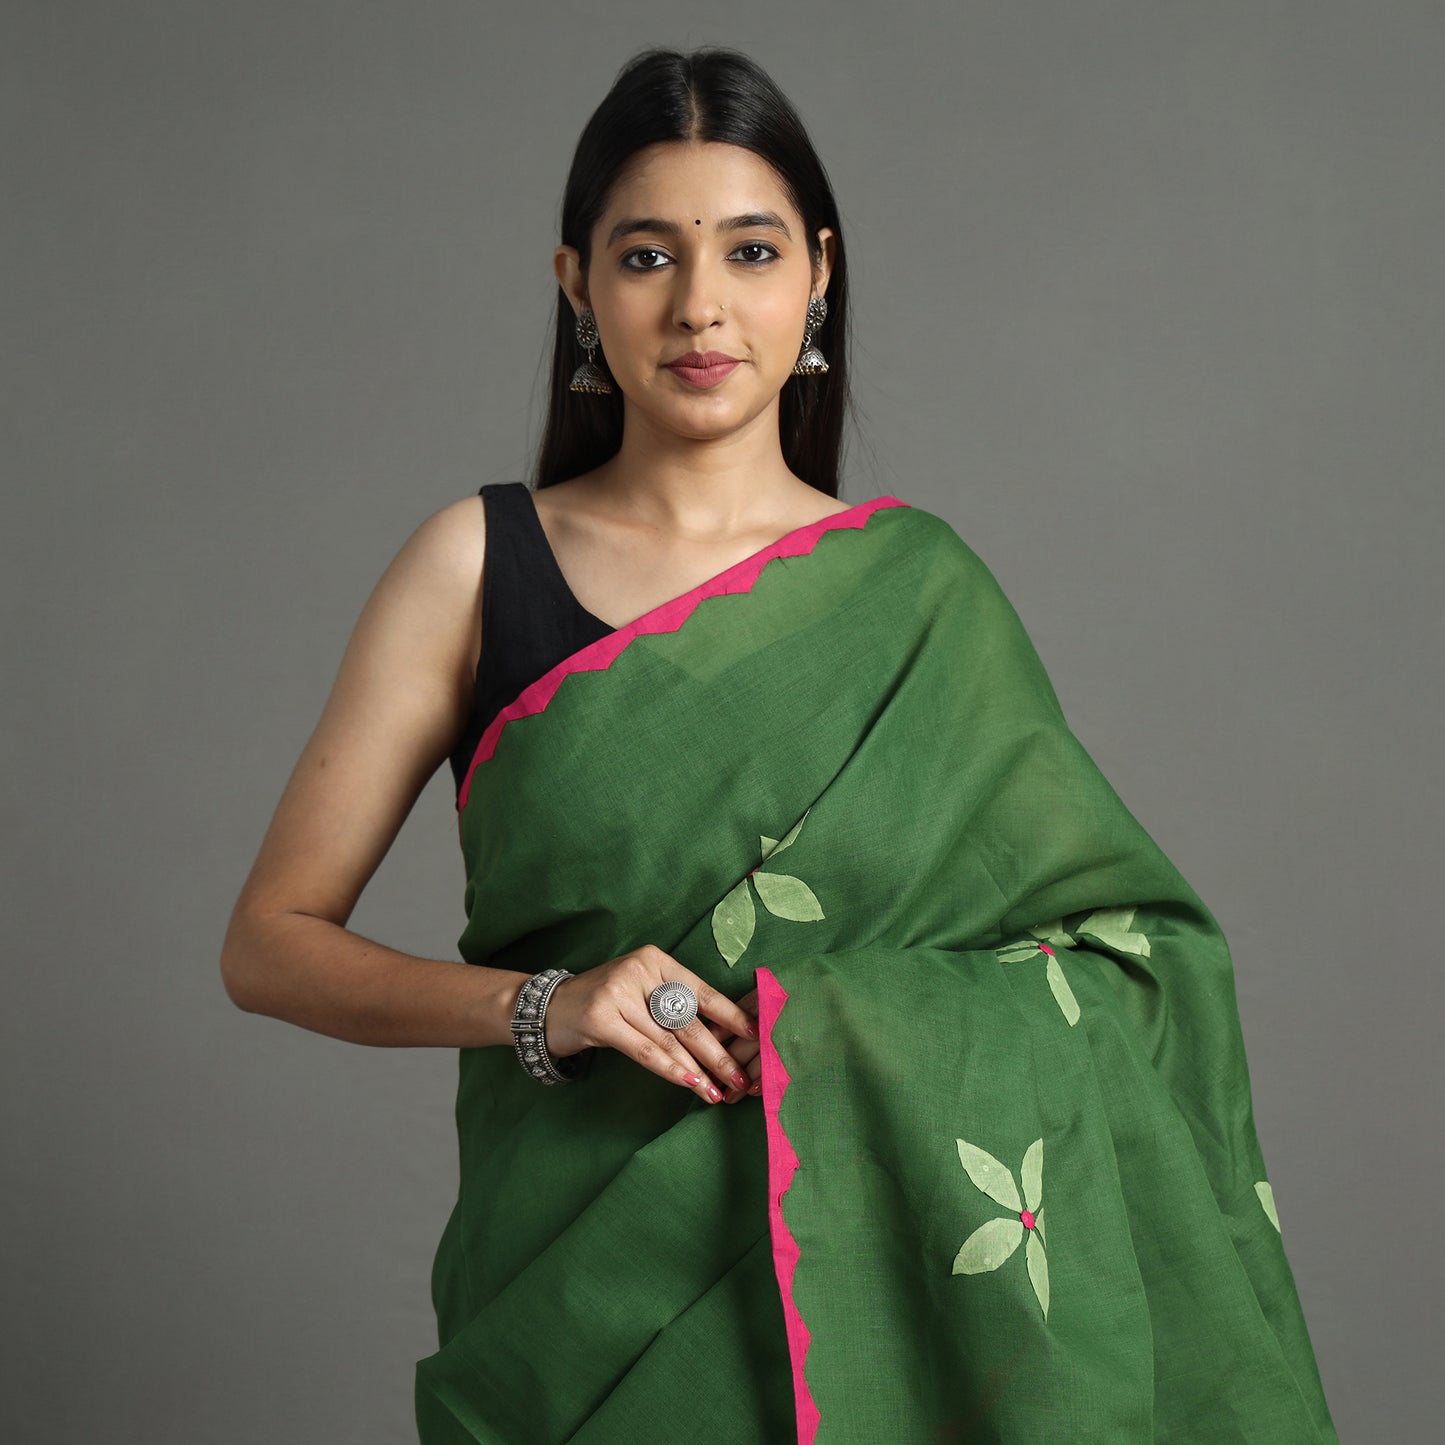 Green - Applique Patti Kaam Pure Cotton Saree from Rampur 02